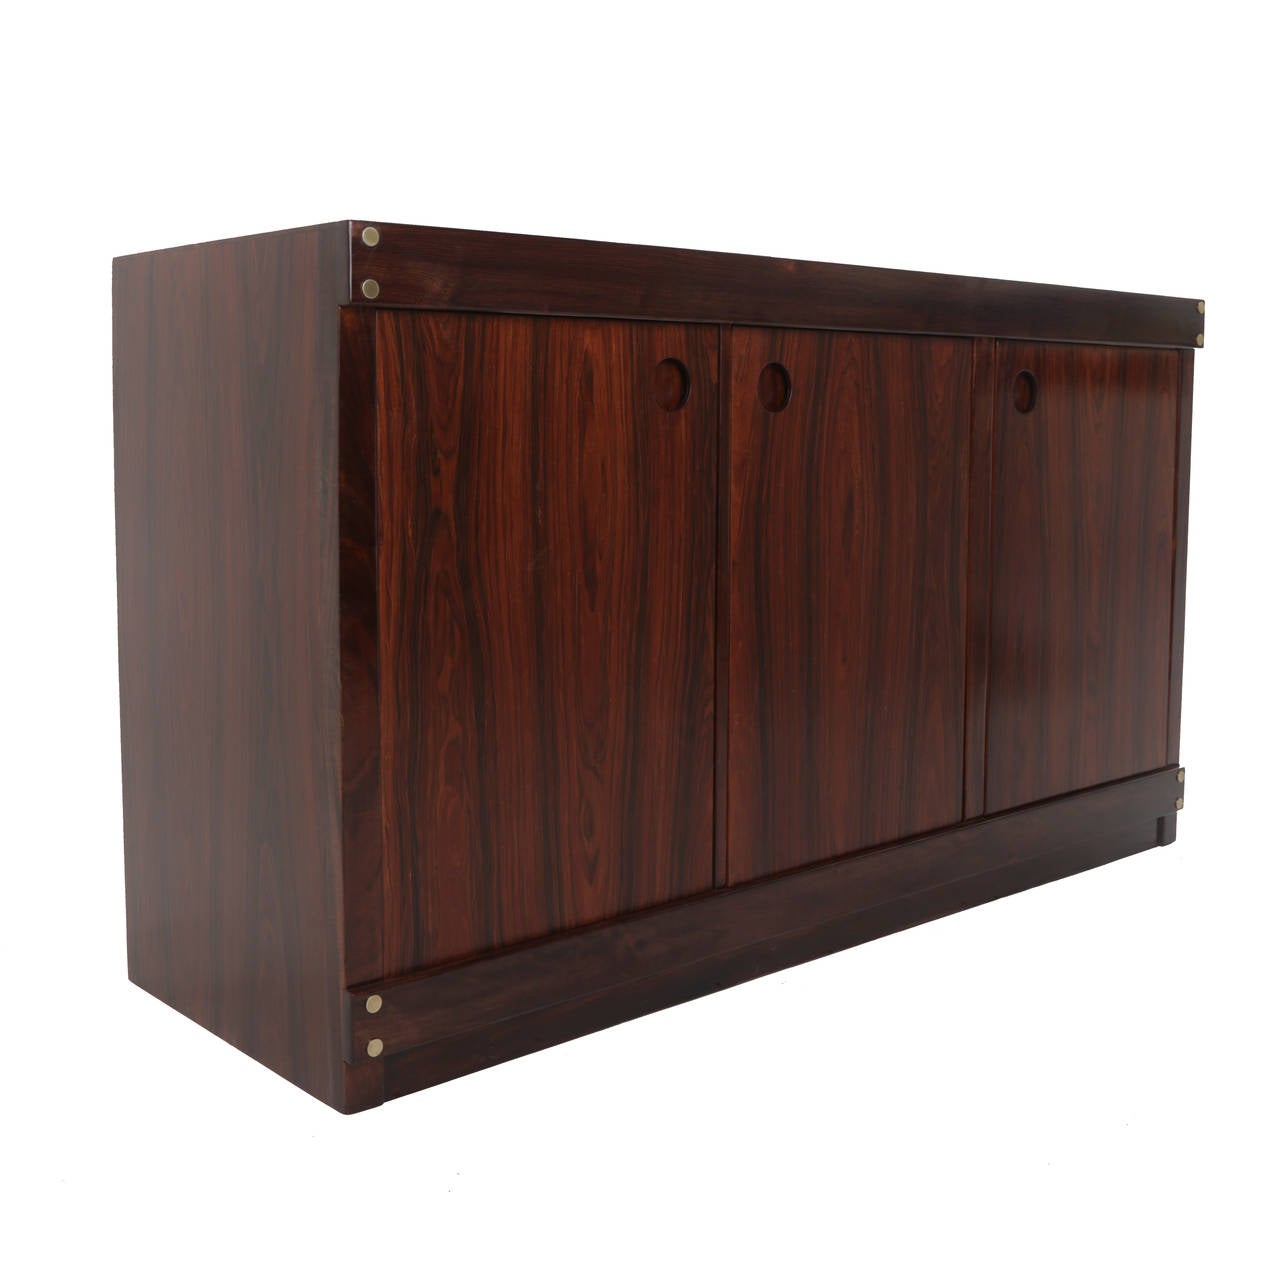 A stunning three-door rosewood credenza or sideboard from Brazil, designed by Sergio Rodrigues. Featuring new black glass top, inset circular pulls and brass plug details. Finished in satin lacquer.

Many pieces are stored in our warehouse, so